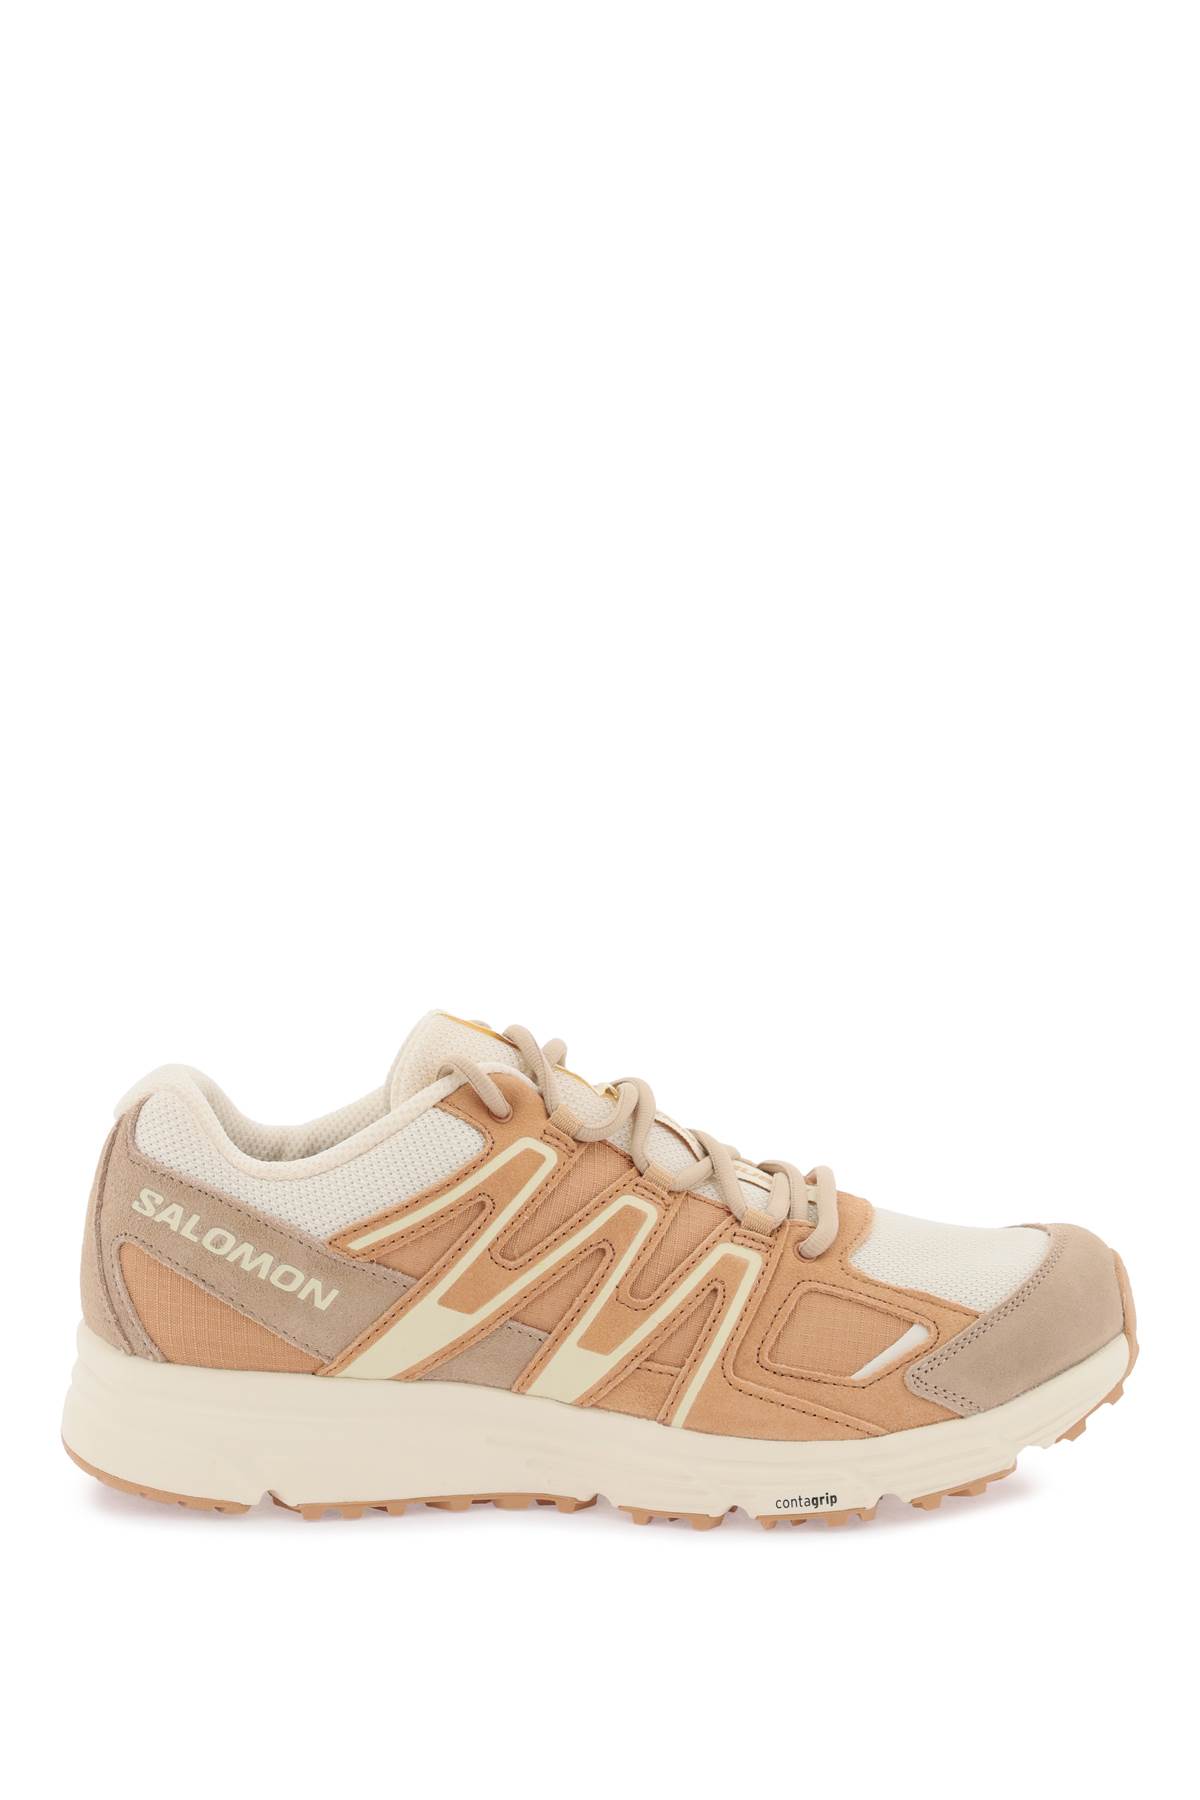 Shop Salomon X-mission 4 Suede Sneakers In Natural Sandstorm Bleached Sand (white)